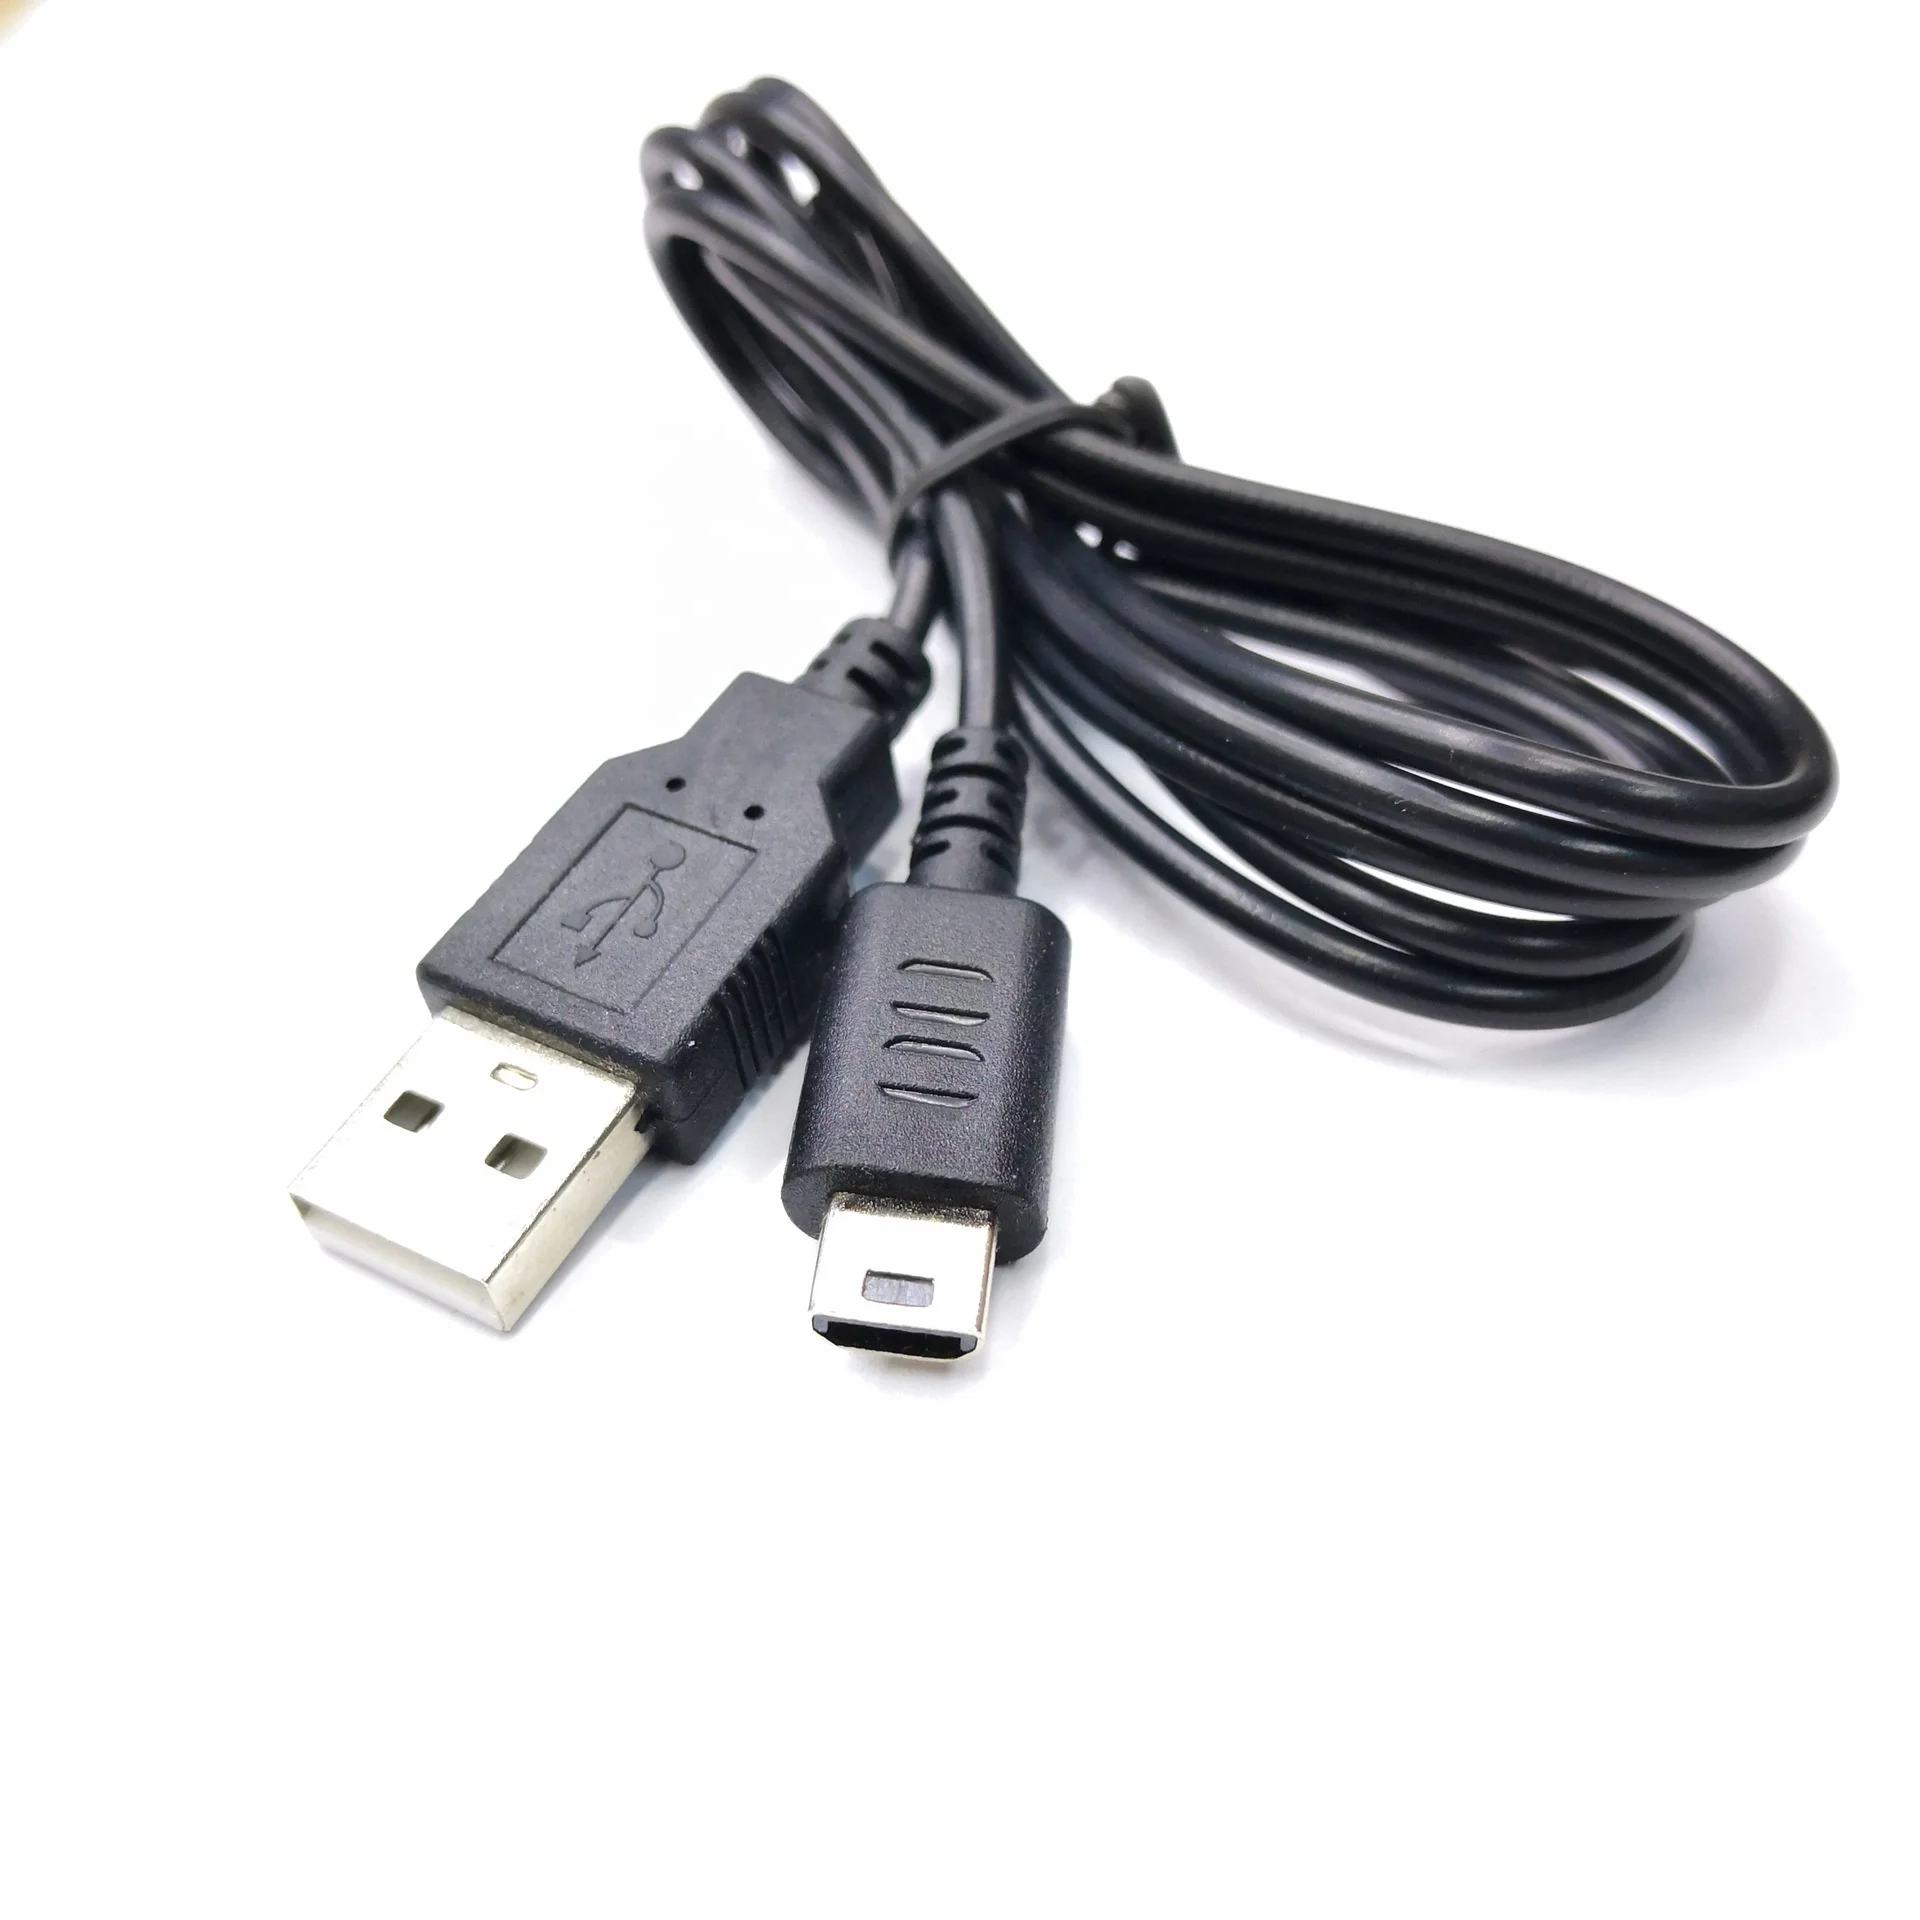 Wholesale 1.2m USB Charging Cable Lead For NDS Lite Power Charger Cord for Nintendo DS Lite DSL From m.alibaba.com